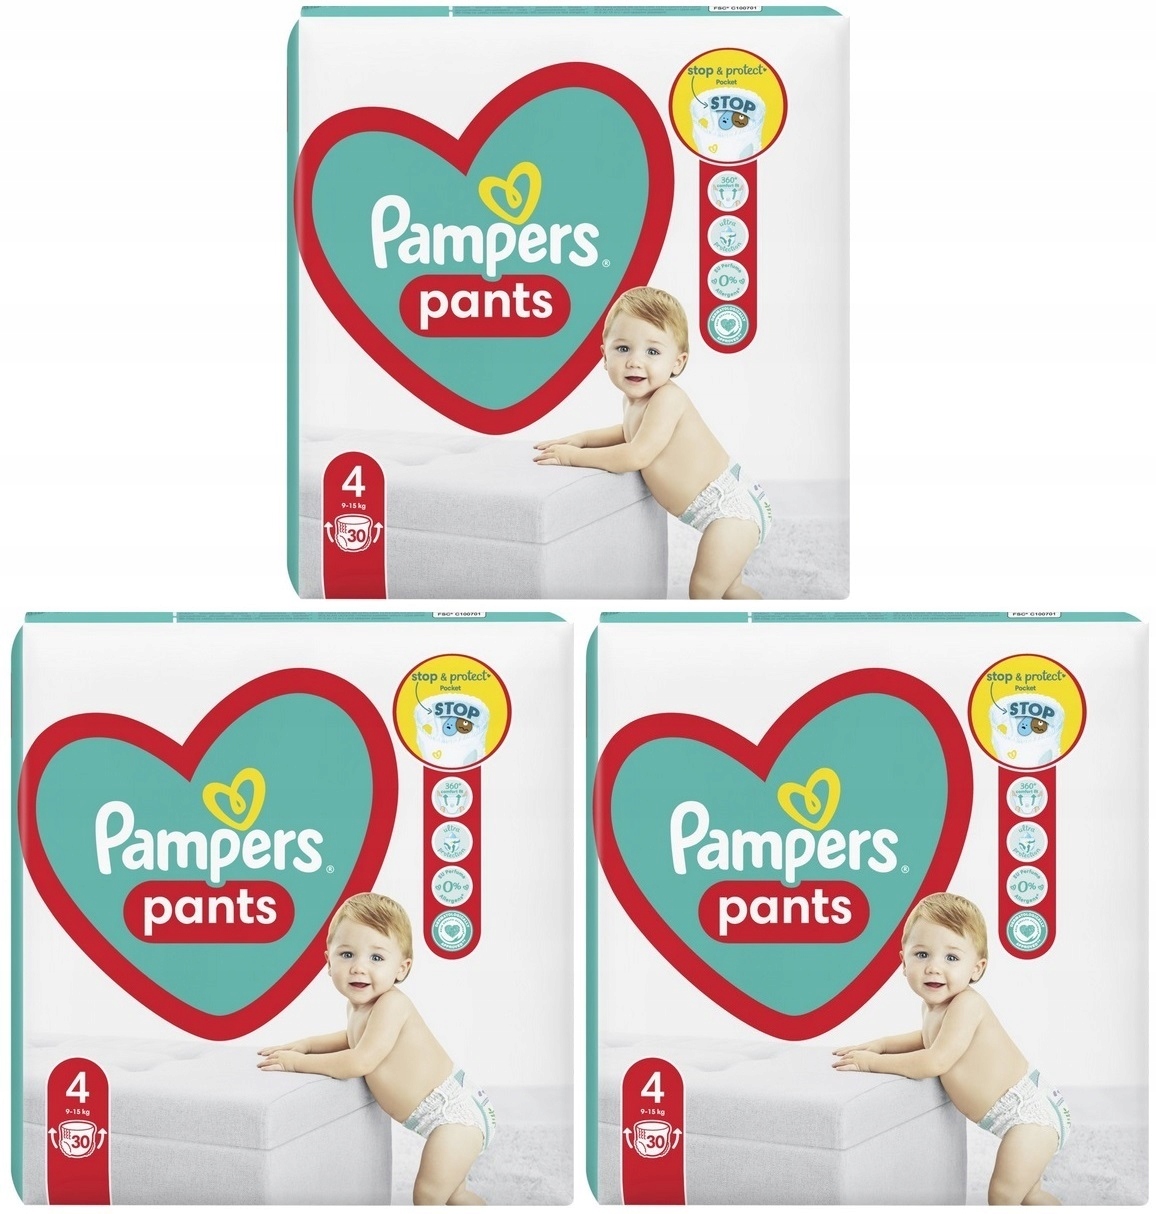 pampers co to